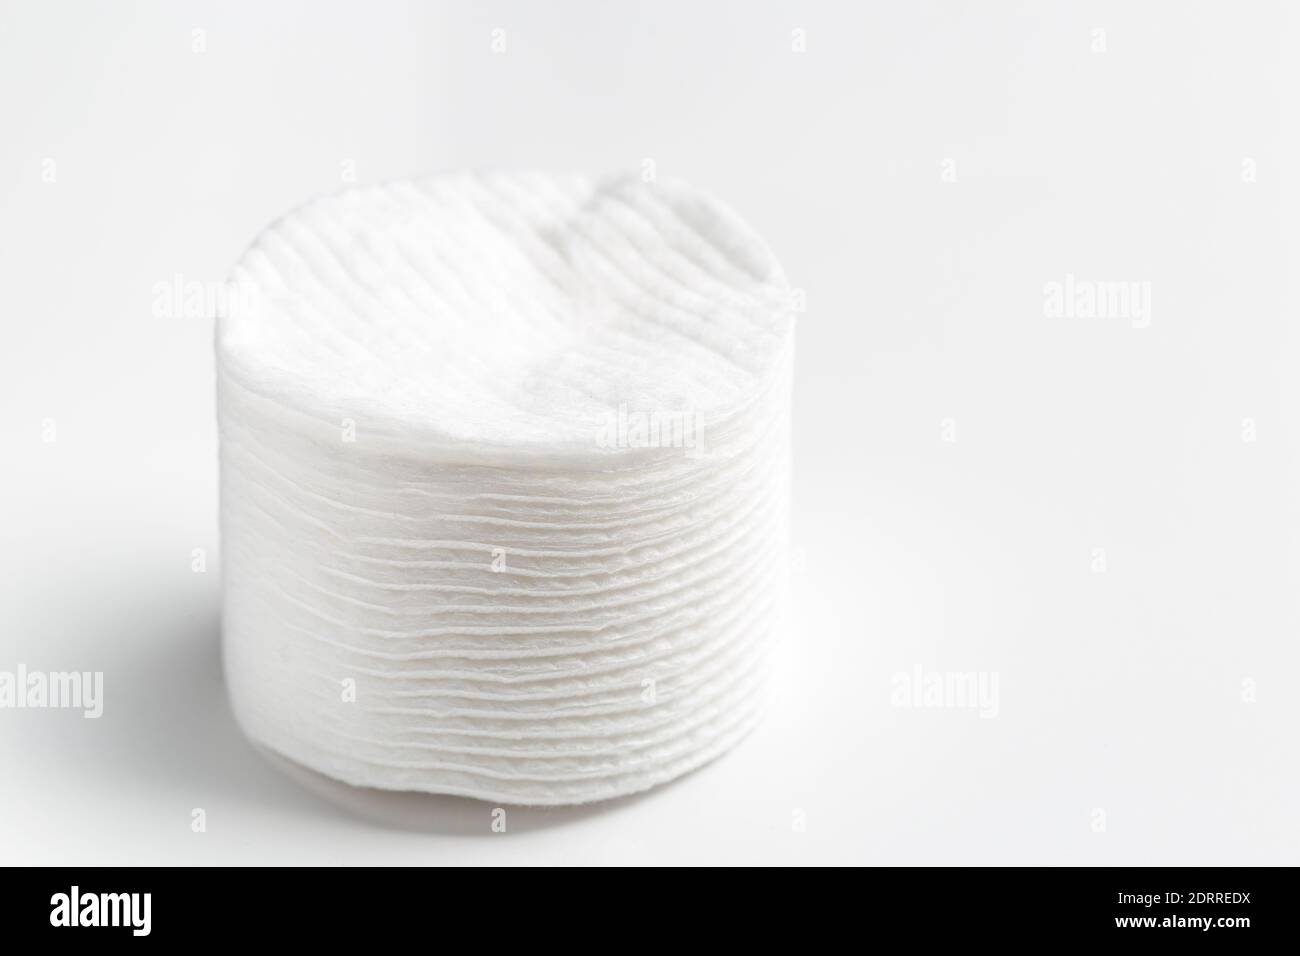 Cotton pads stack on gray background Stock Photo